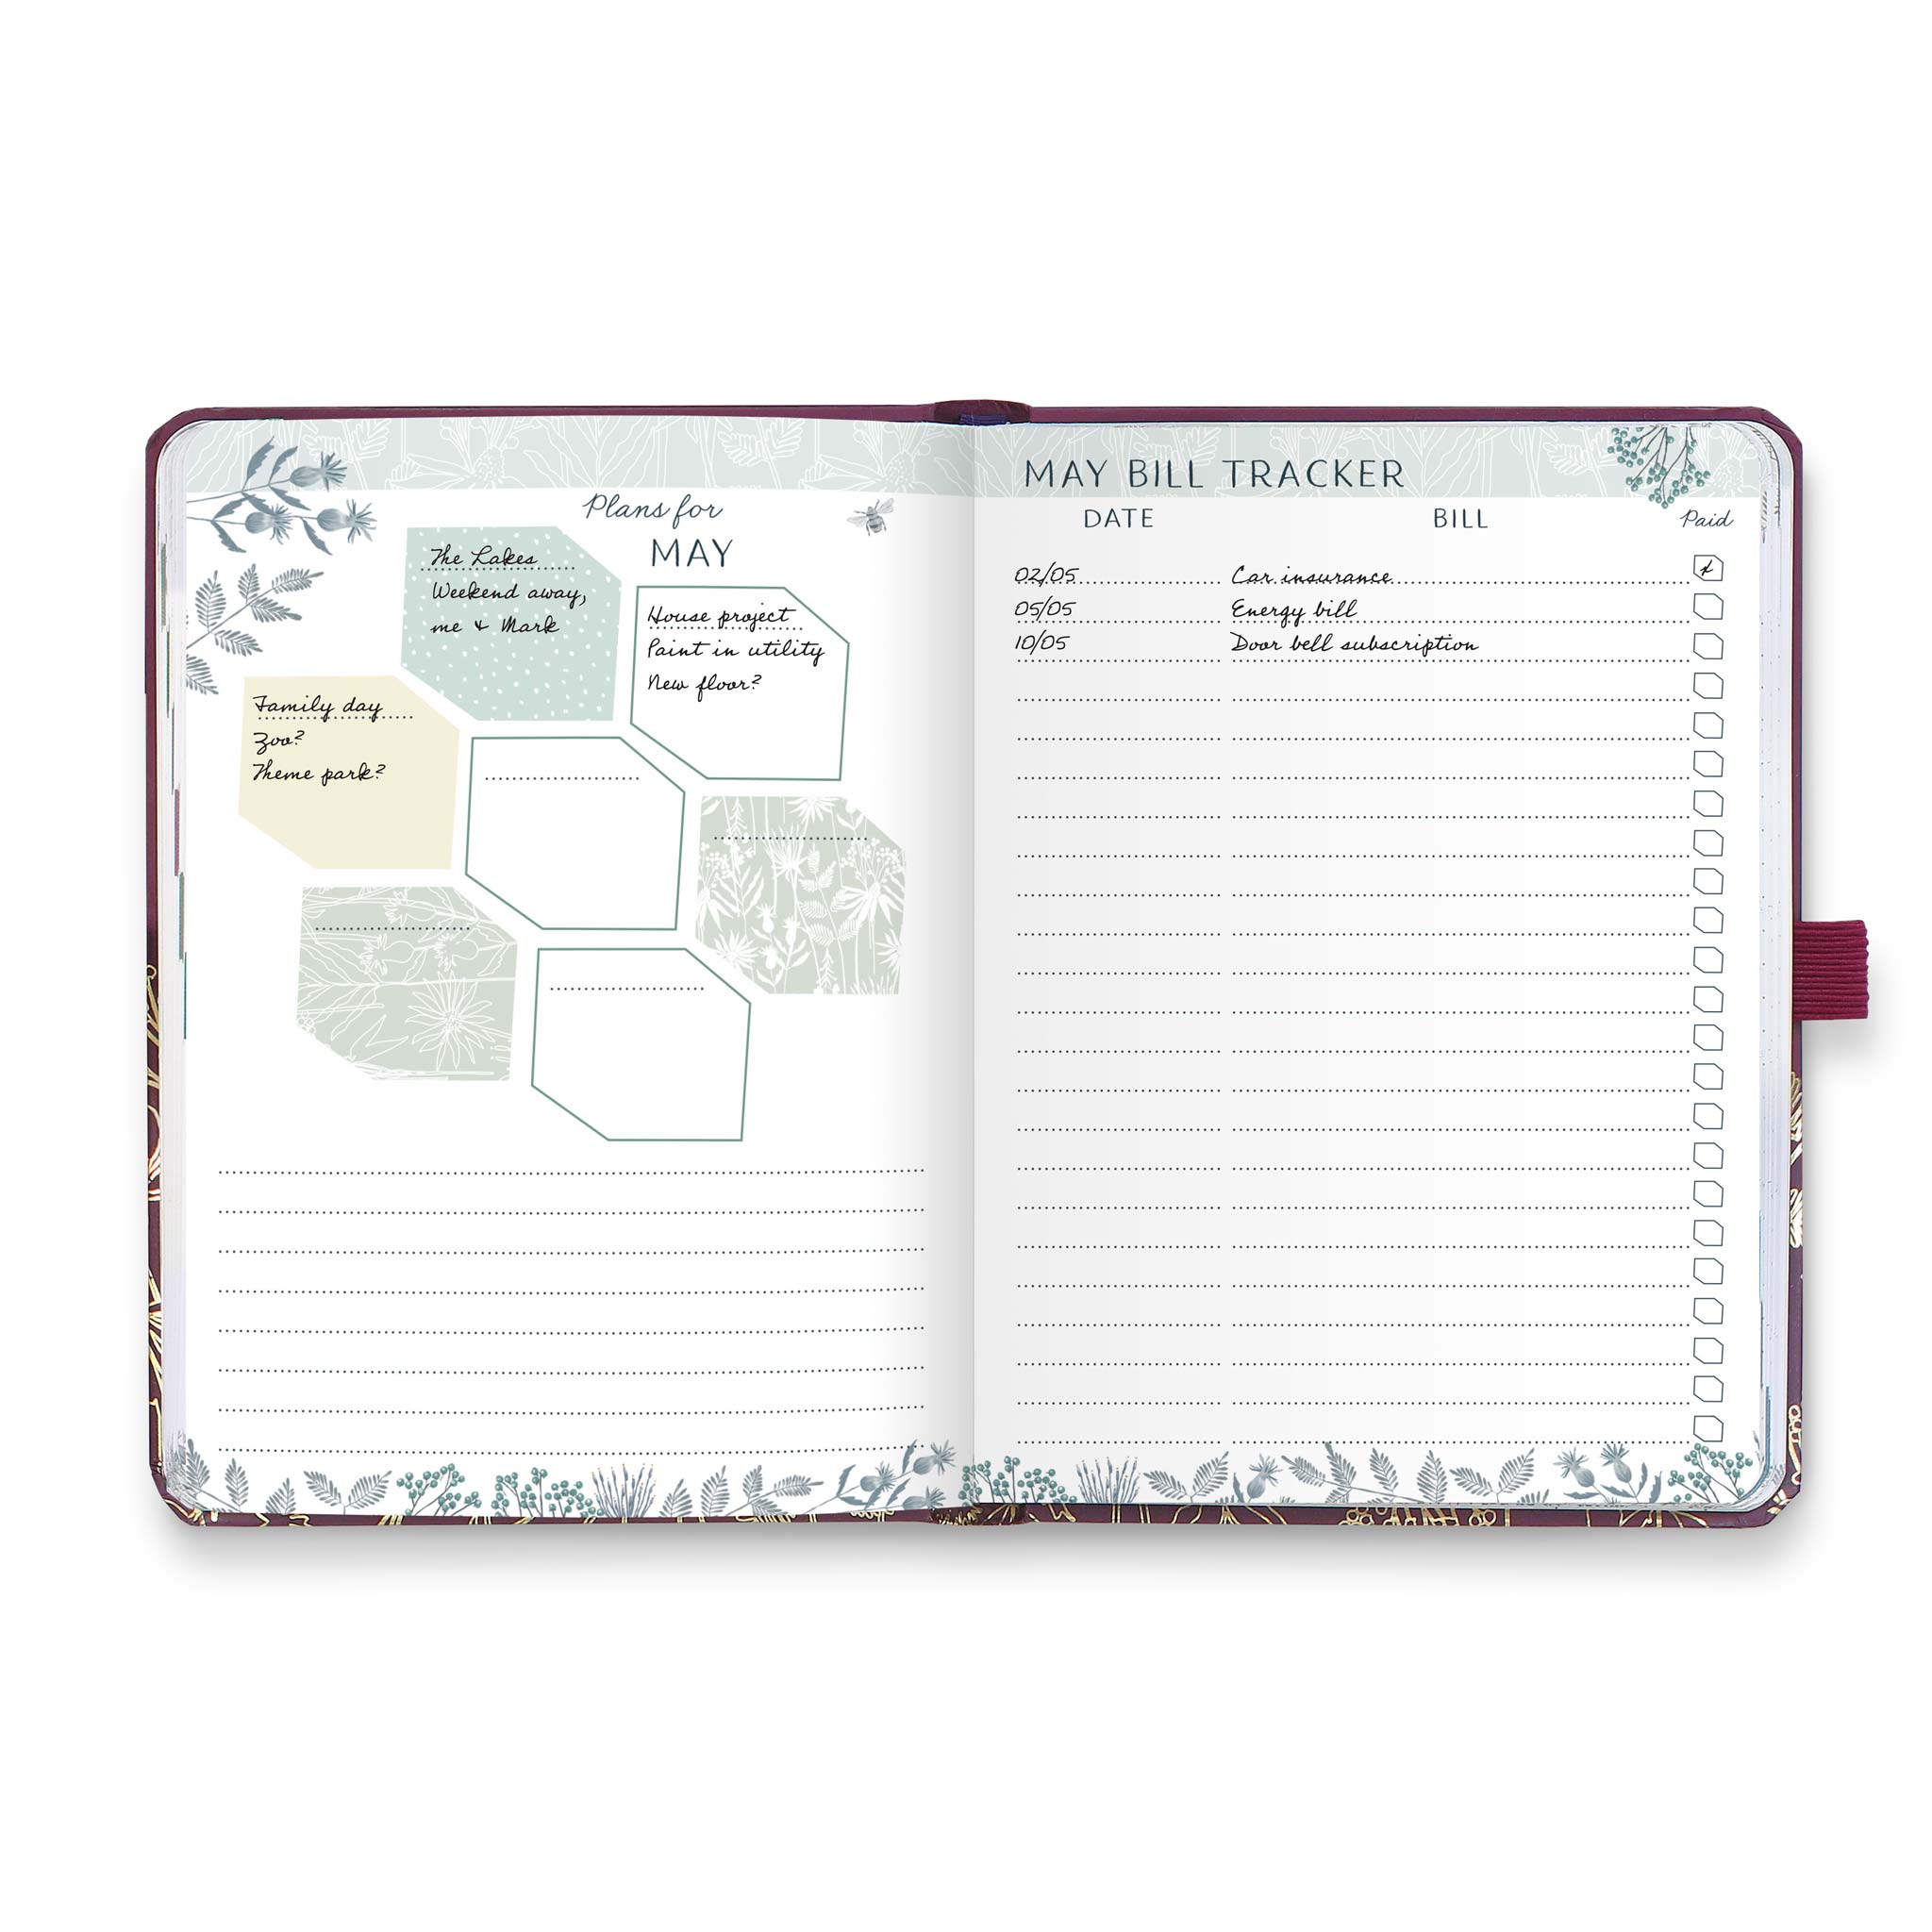 An open diary planner with a monthly plans page and a monthly bill tracker